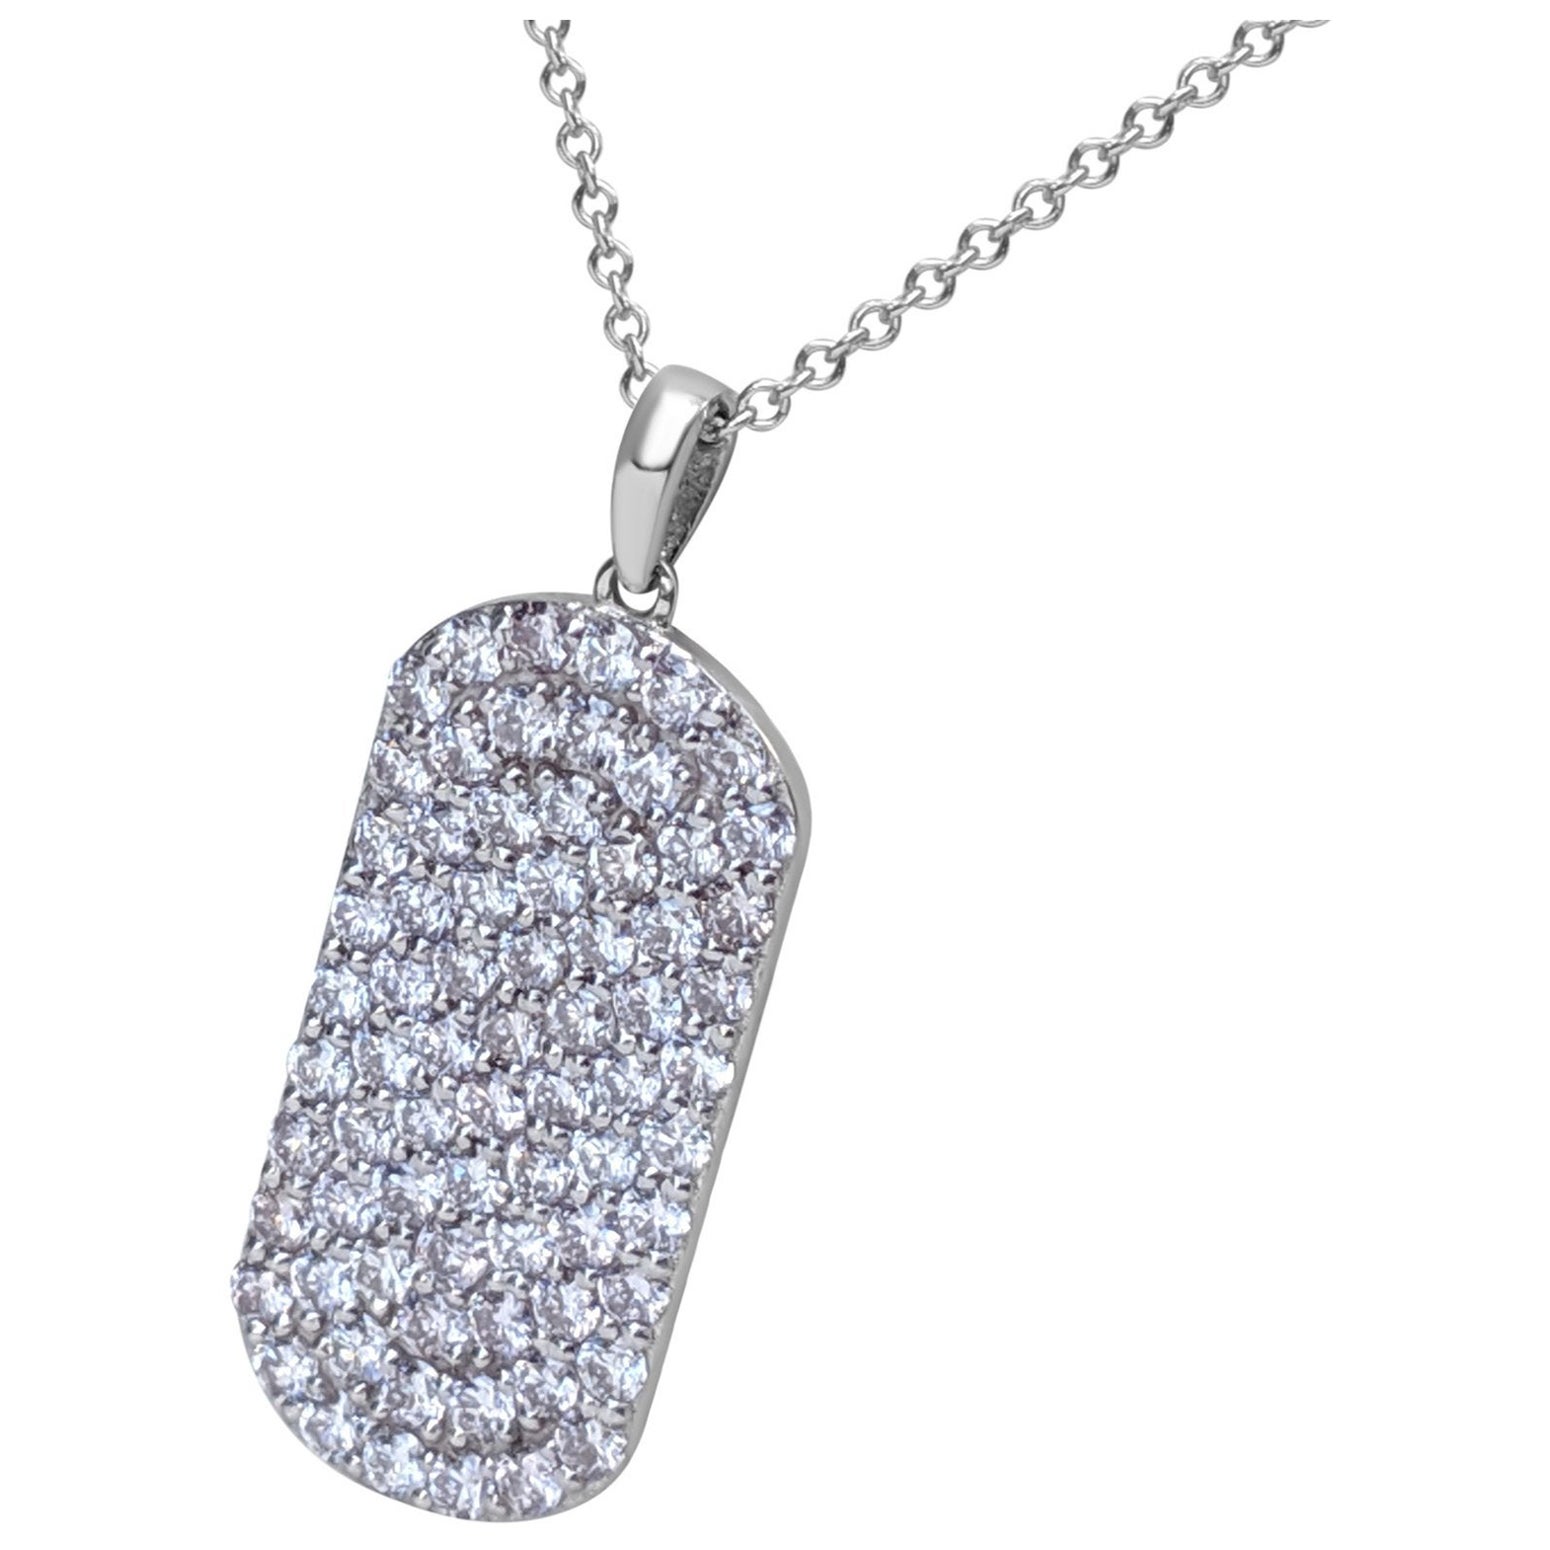 NO RESERVE! 1.10 Ct Fancy Pink Diamond 14 kt. White Gold Pendant Necklace For Sale